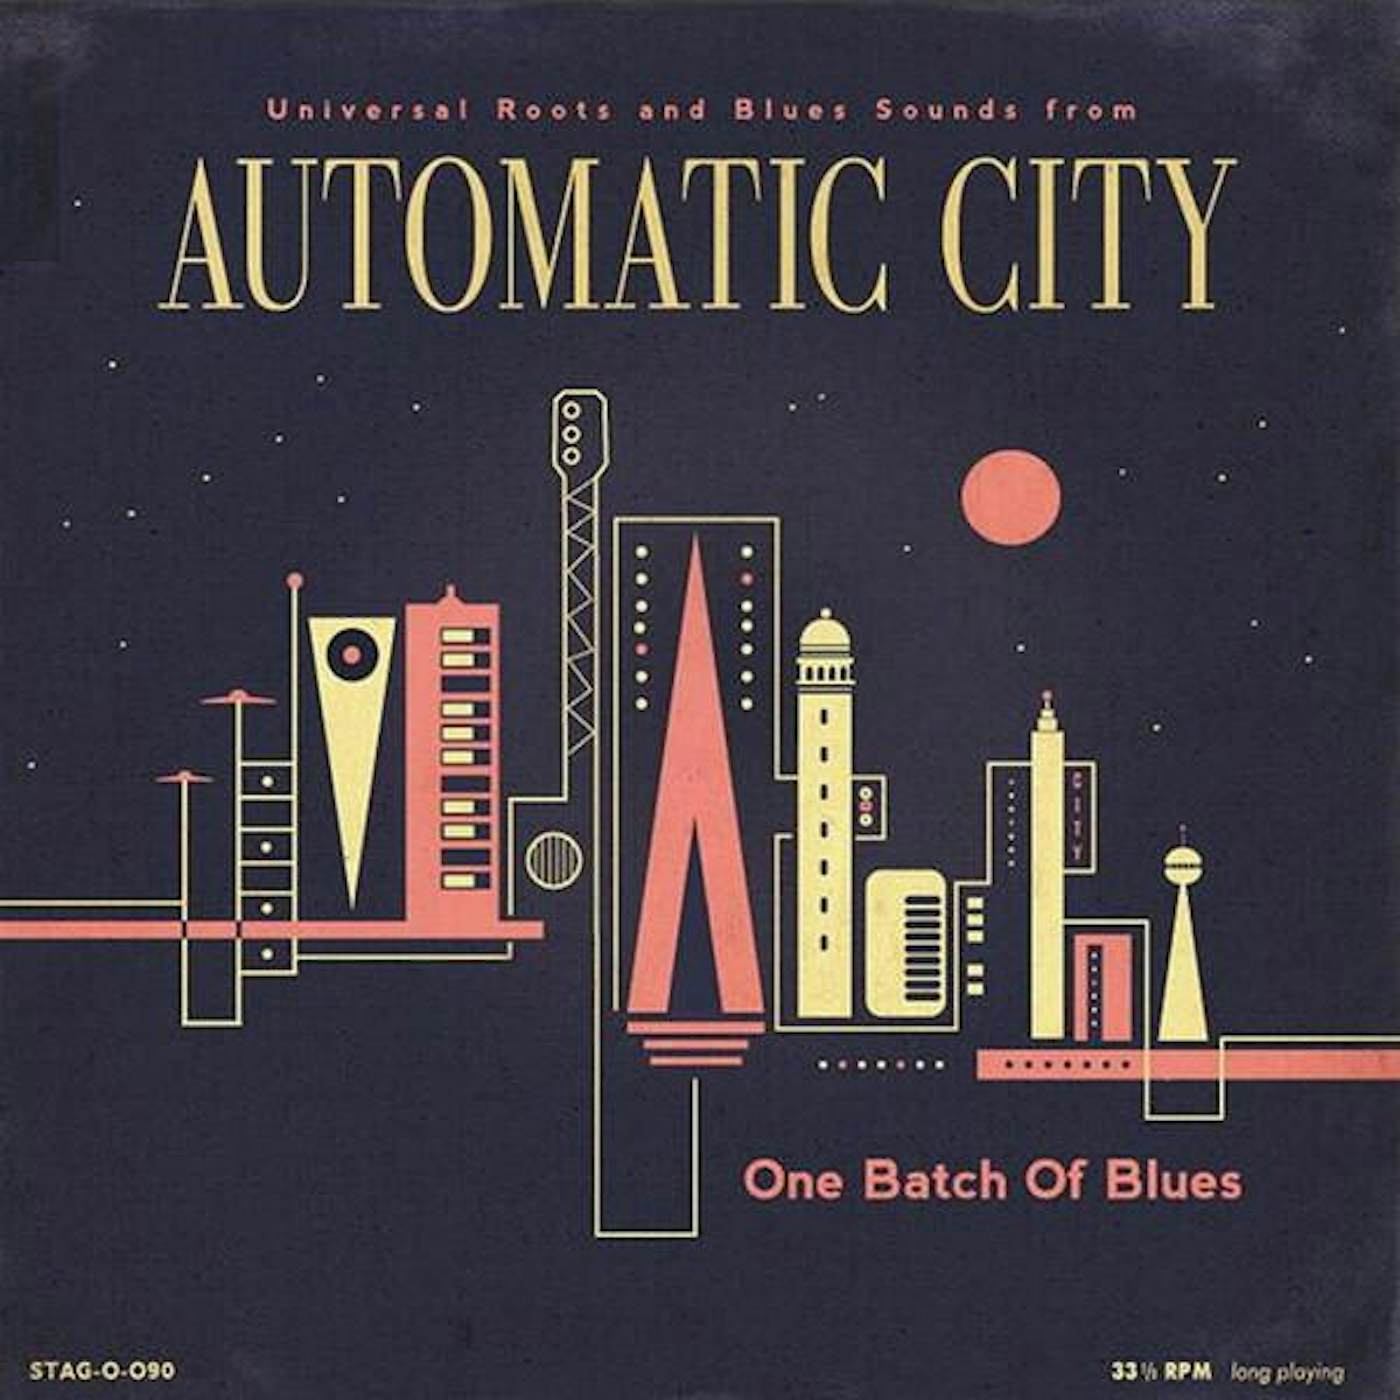 Automatic City One Batch Of Blues Vinyl Record